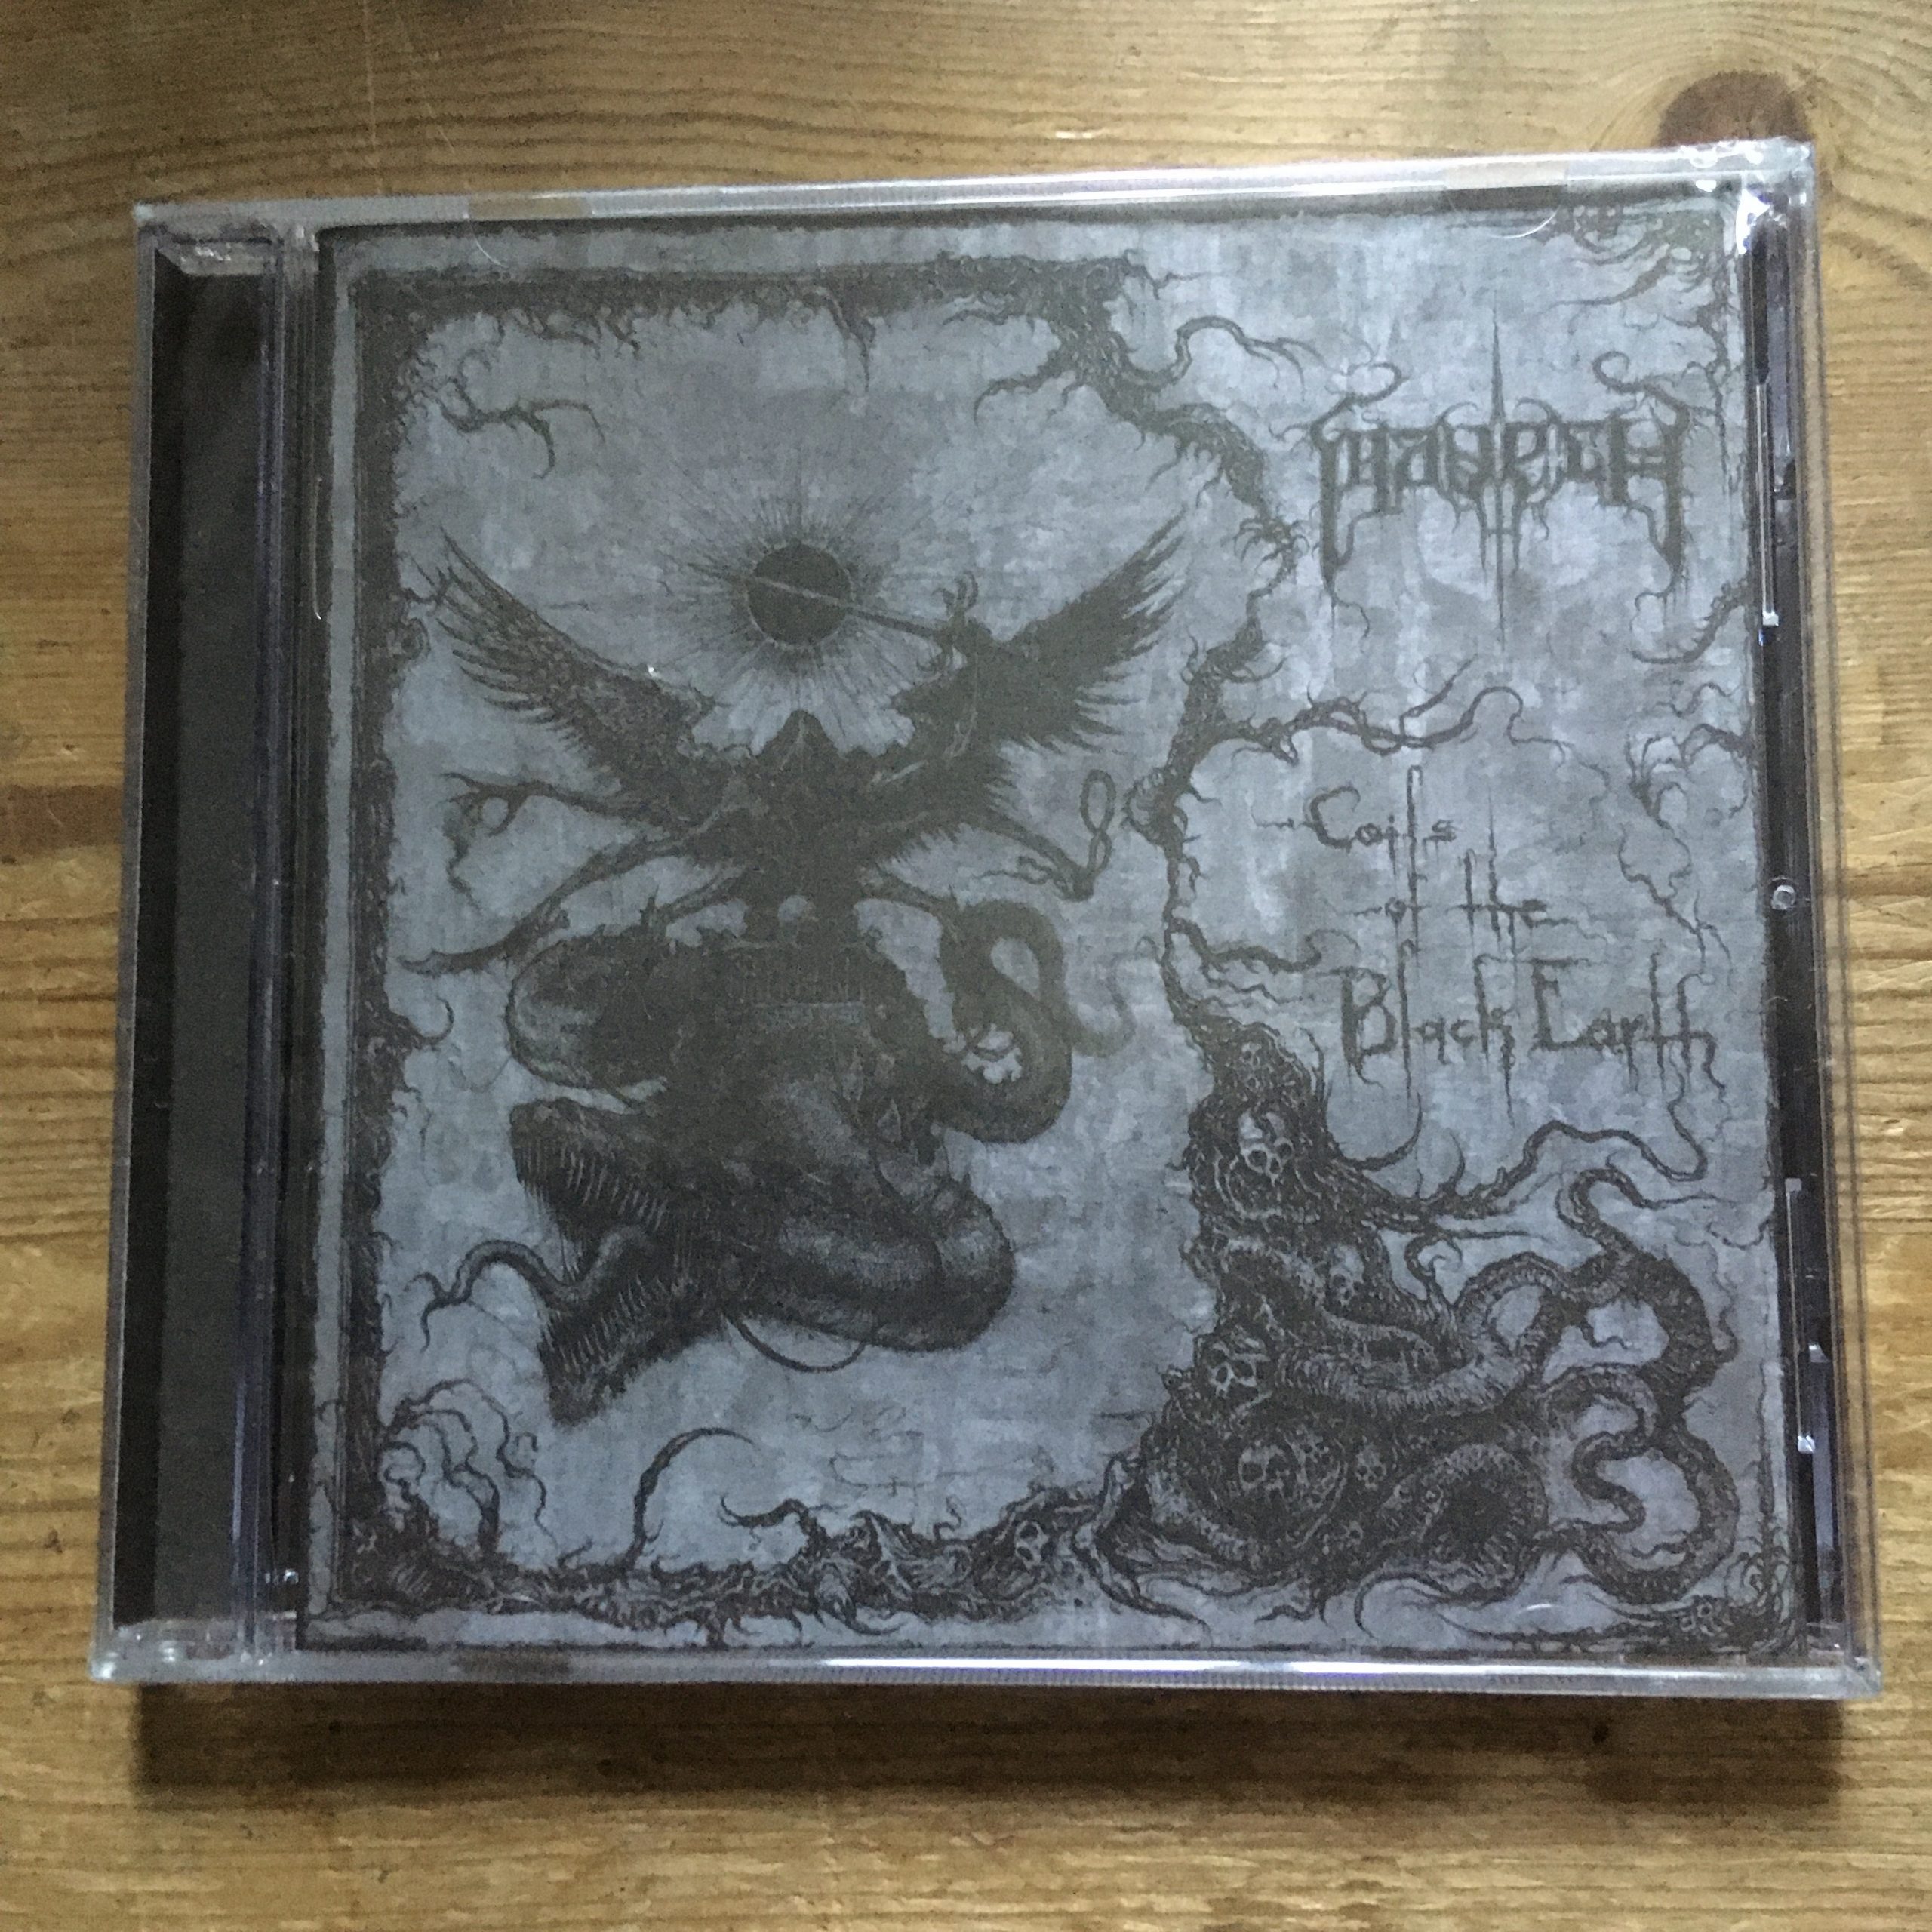 Photo of the Maveth - "Coils of the Black Earth" CD